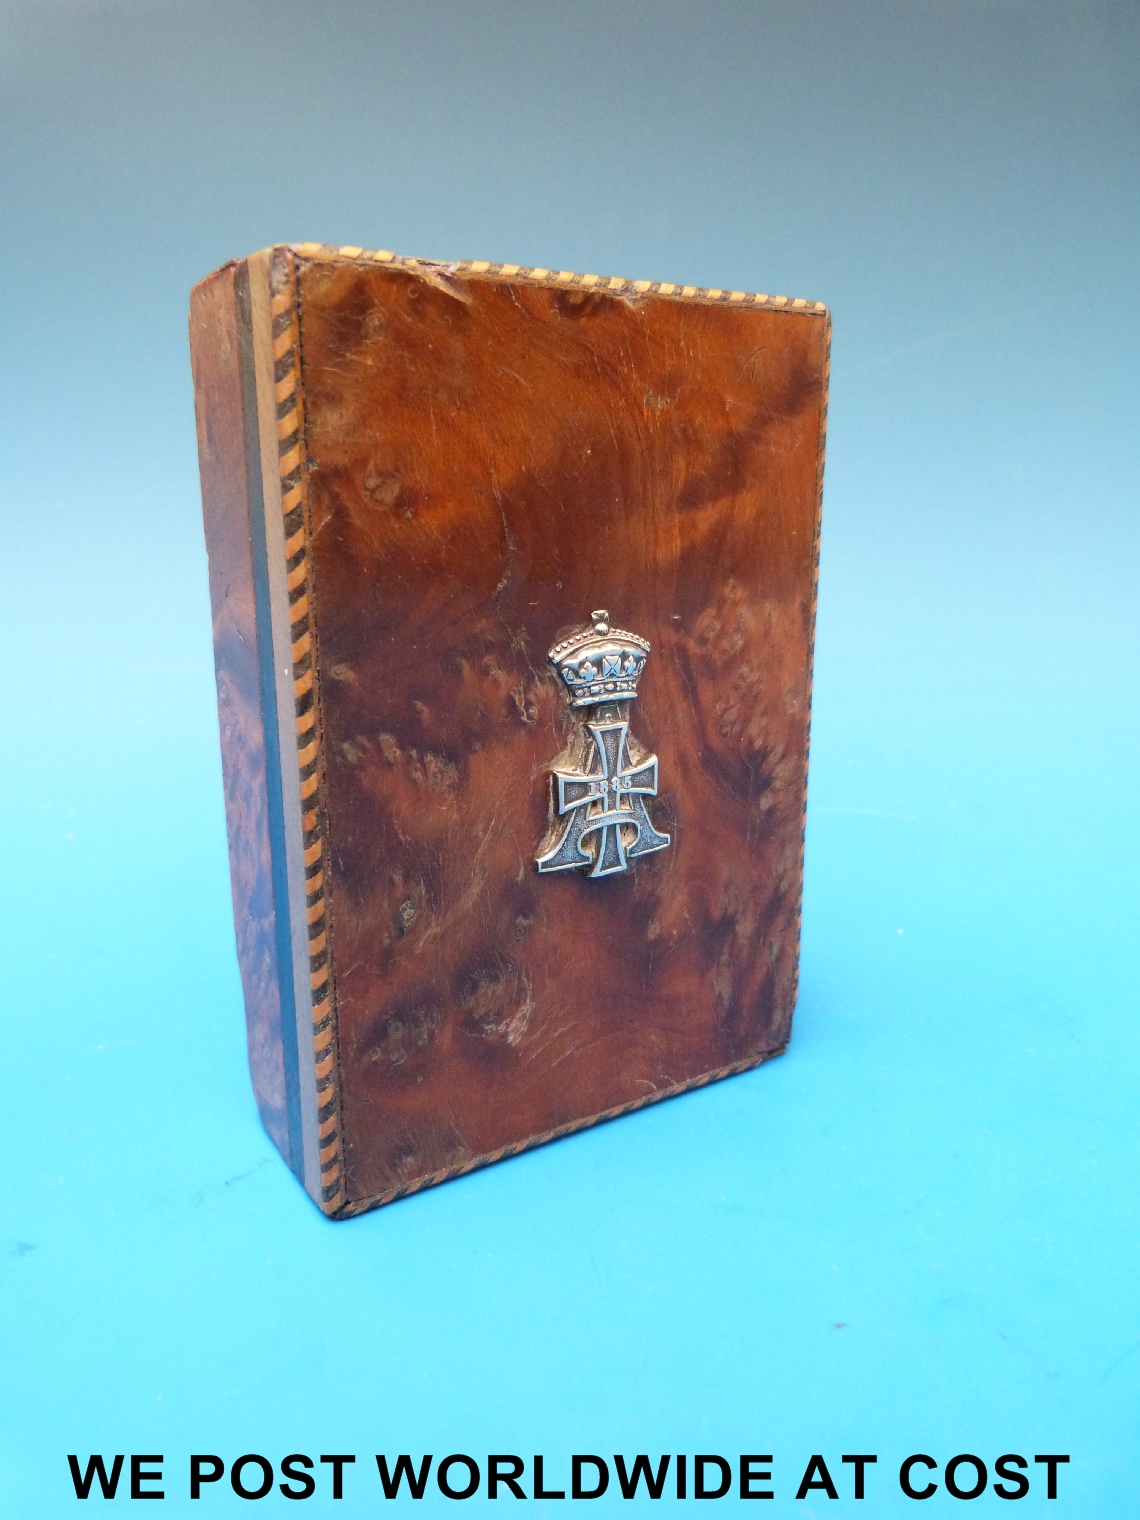 A late 19th century military paperweight, burr walnut and marquetry inlaid, inset with silver